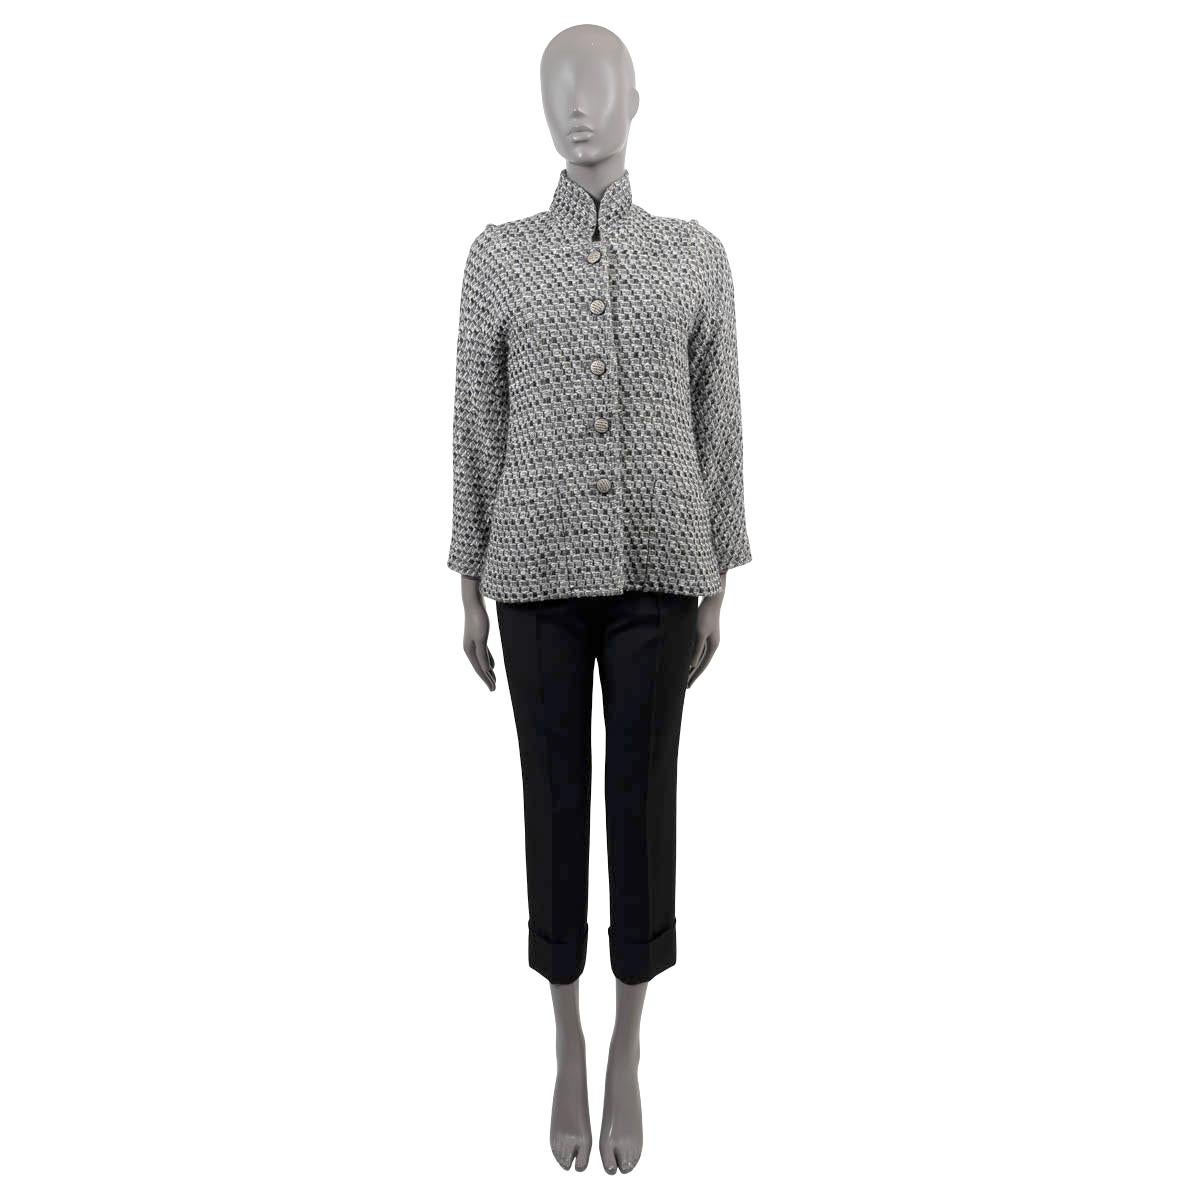 100% authentic Chanel lurex tweed jacket in black, cream, grey and silver wool (39%), viscose (27%), nylon (20%) and acrylic (14%). Features a stand-up collar, as well a second almost off the shoulder neckline, raglan sleeves and two open pockets at